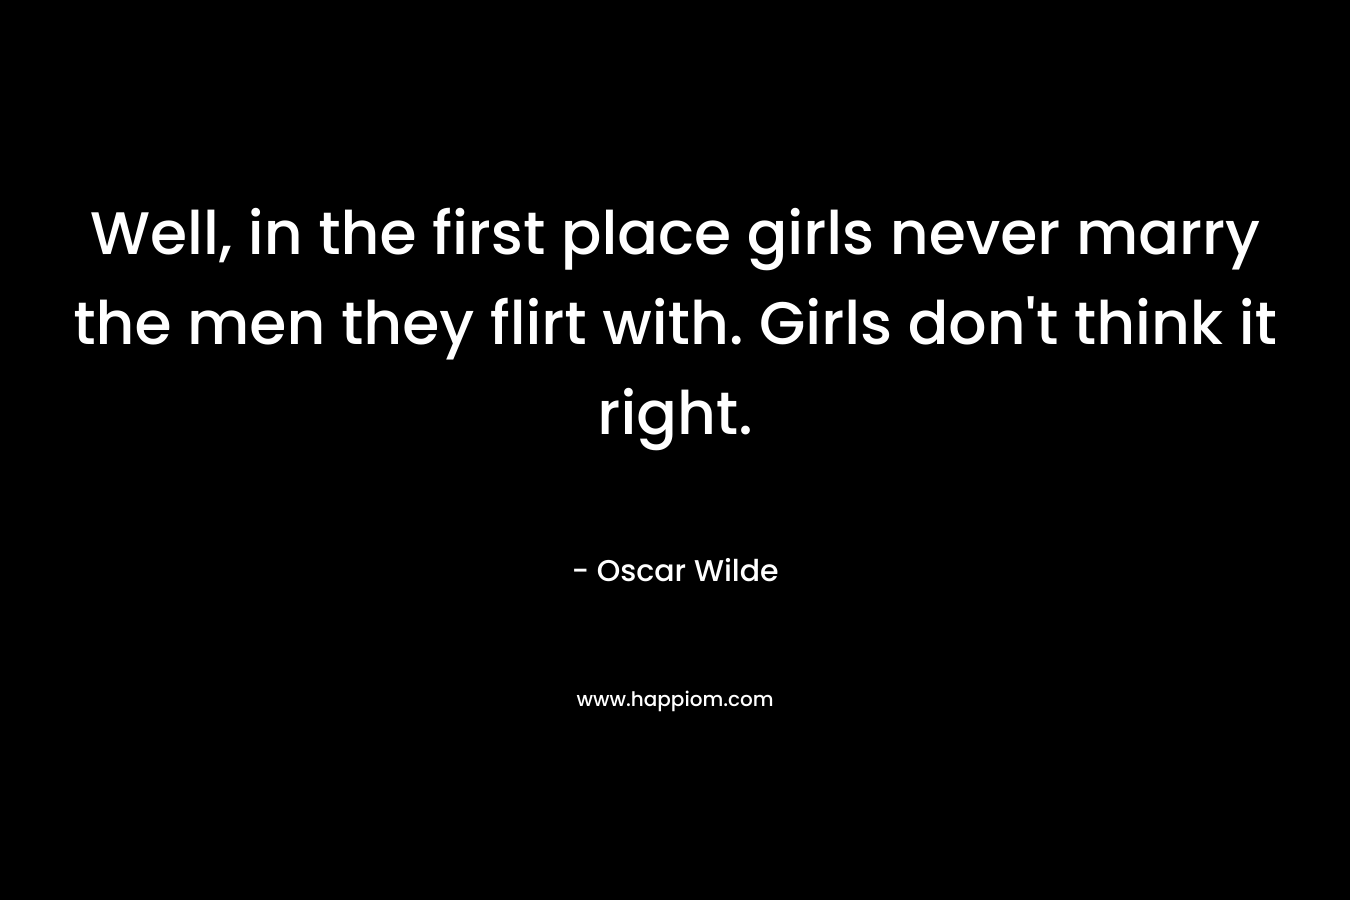 Well, in the first place girls never marry the men they flirt with. Girls don’t think it right. – Oscar Wilde